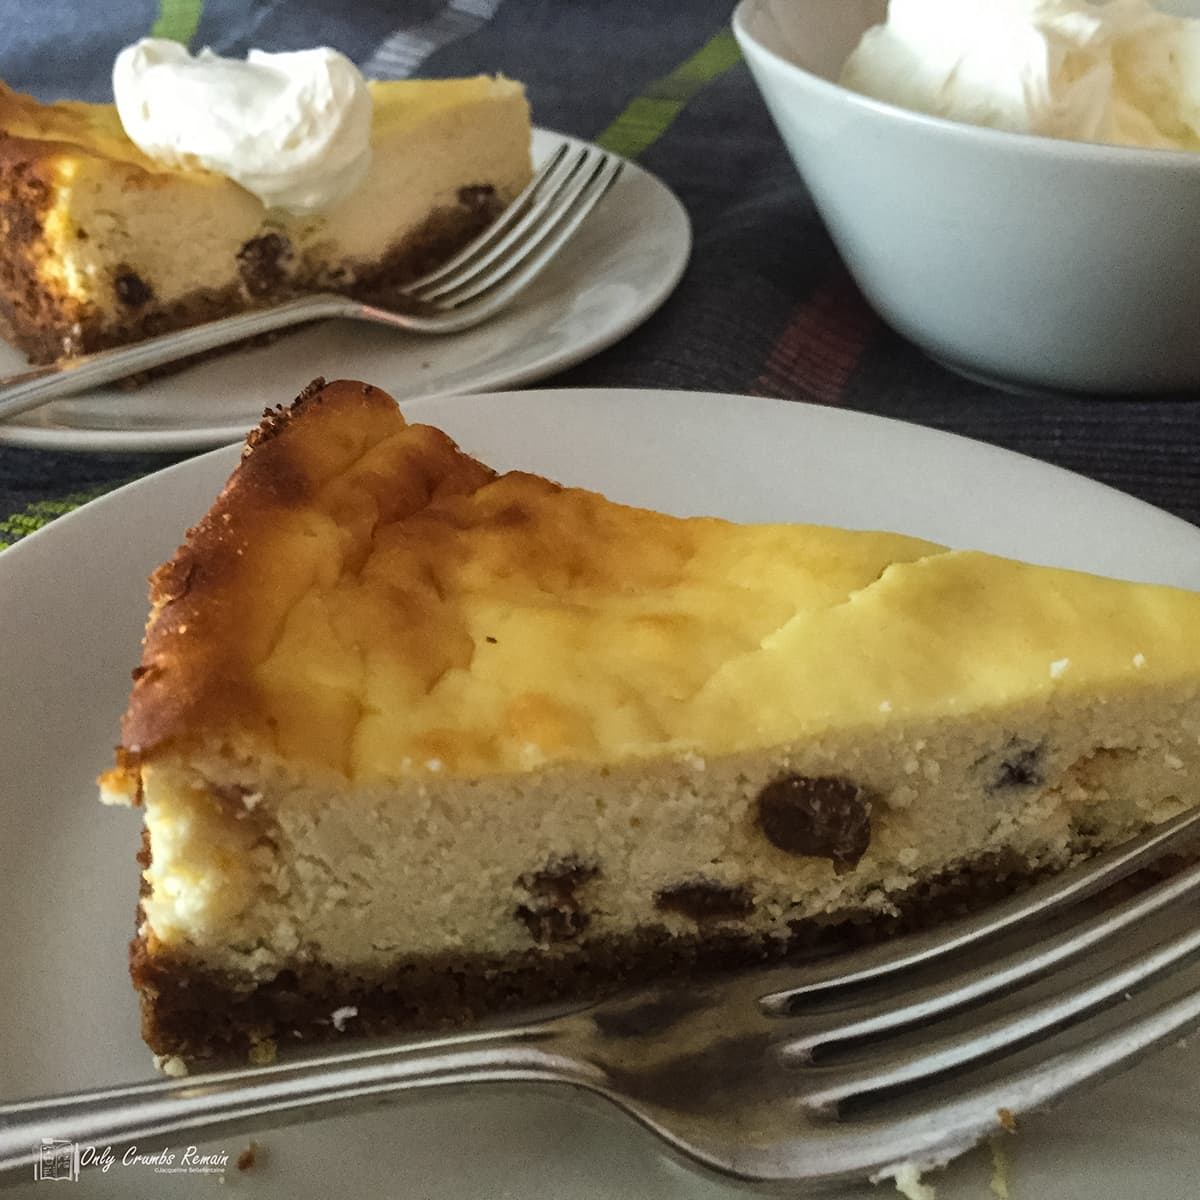 slice of baked lemon cheesecake on plate with second slice behind.